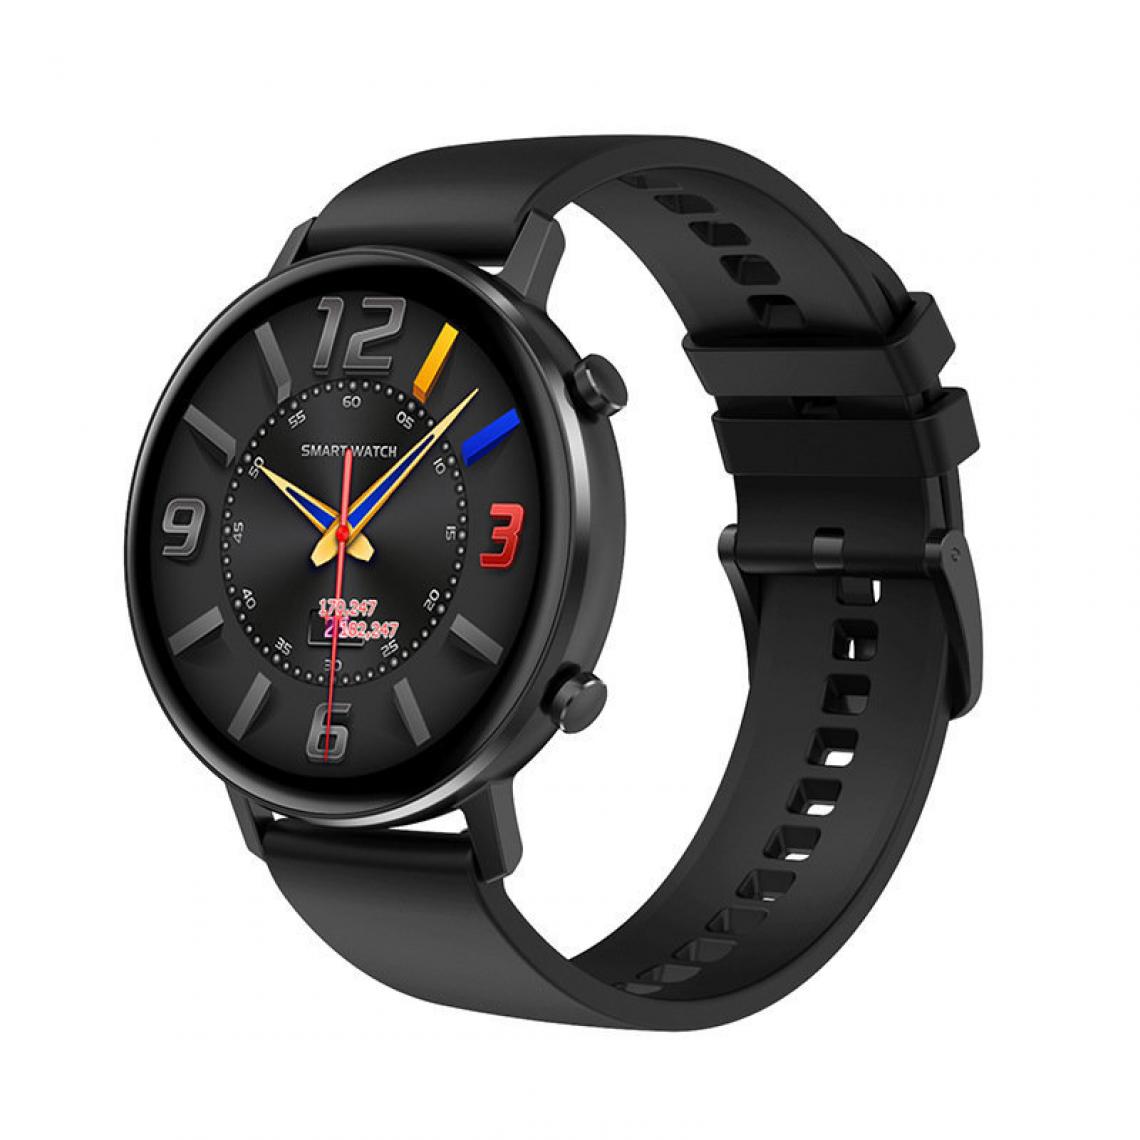 Chronotech Montres - Chronus Smartwatch for Women with 1.3 inch HD screen IP68 waterproof with activity tracker and pedometer, heart rate monitor Android / iOS(black) - Montre connectée